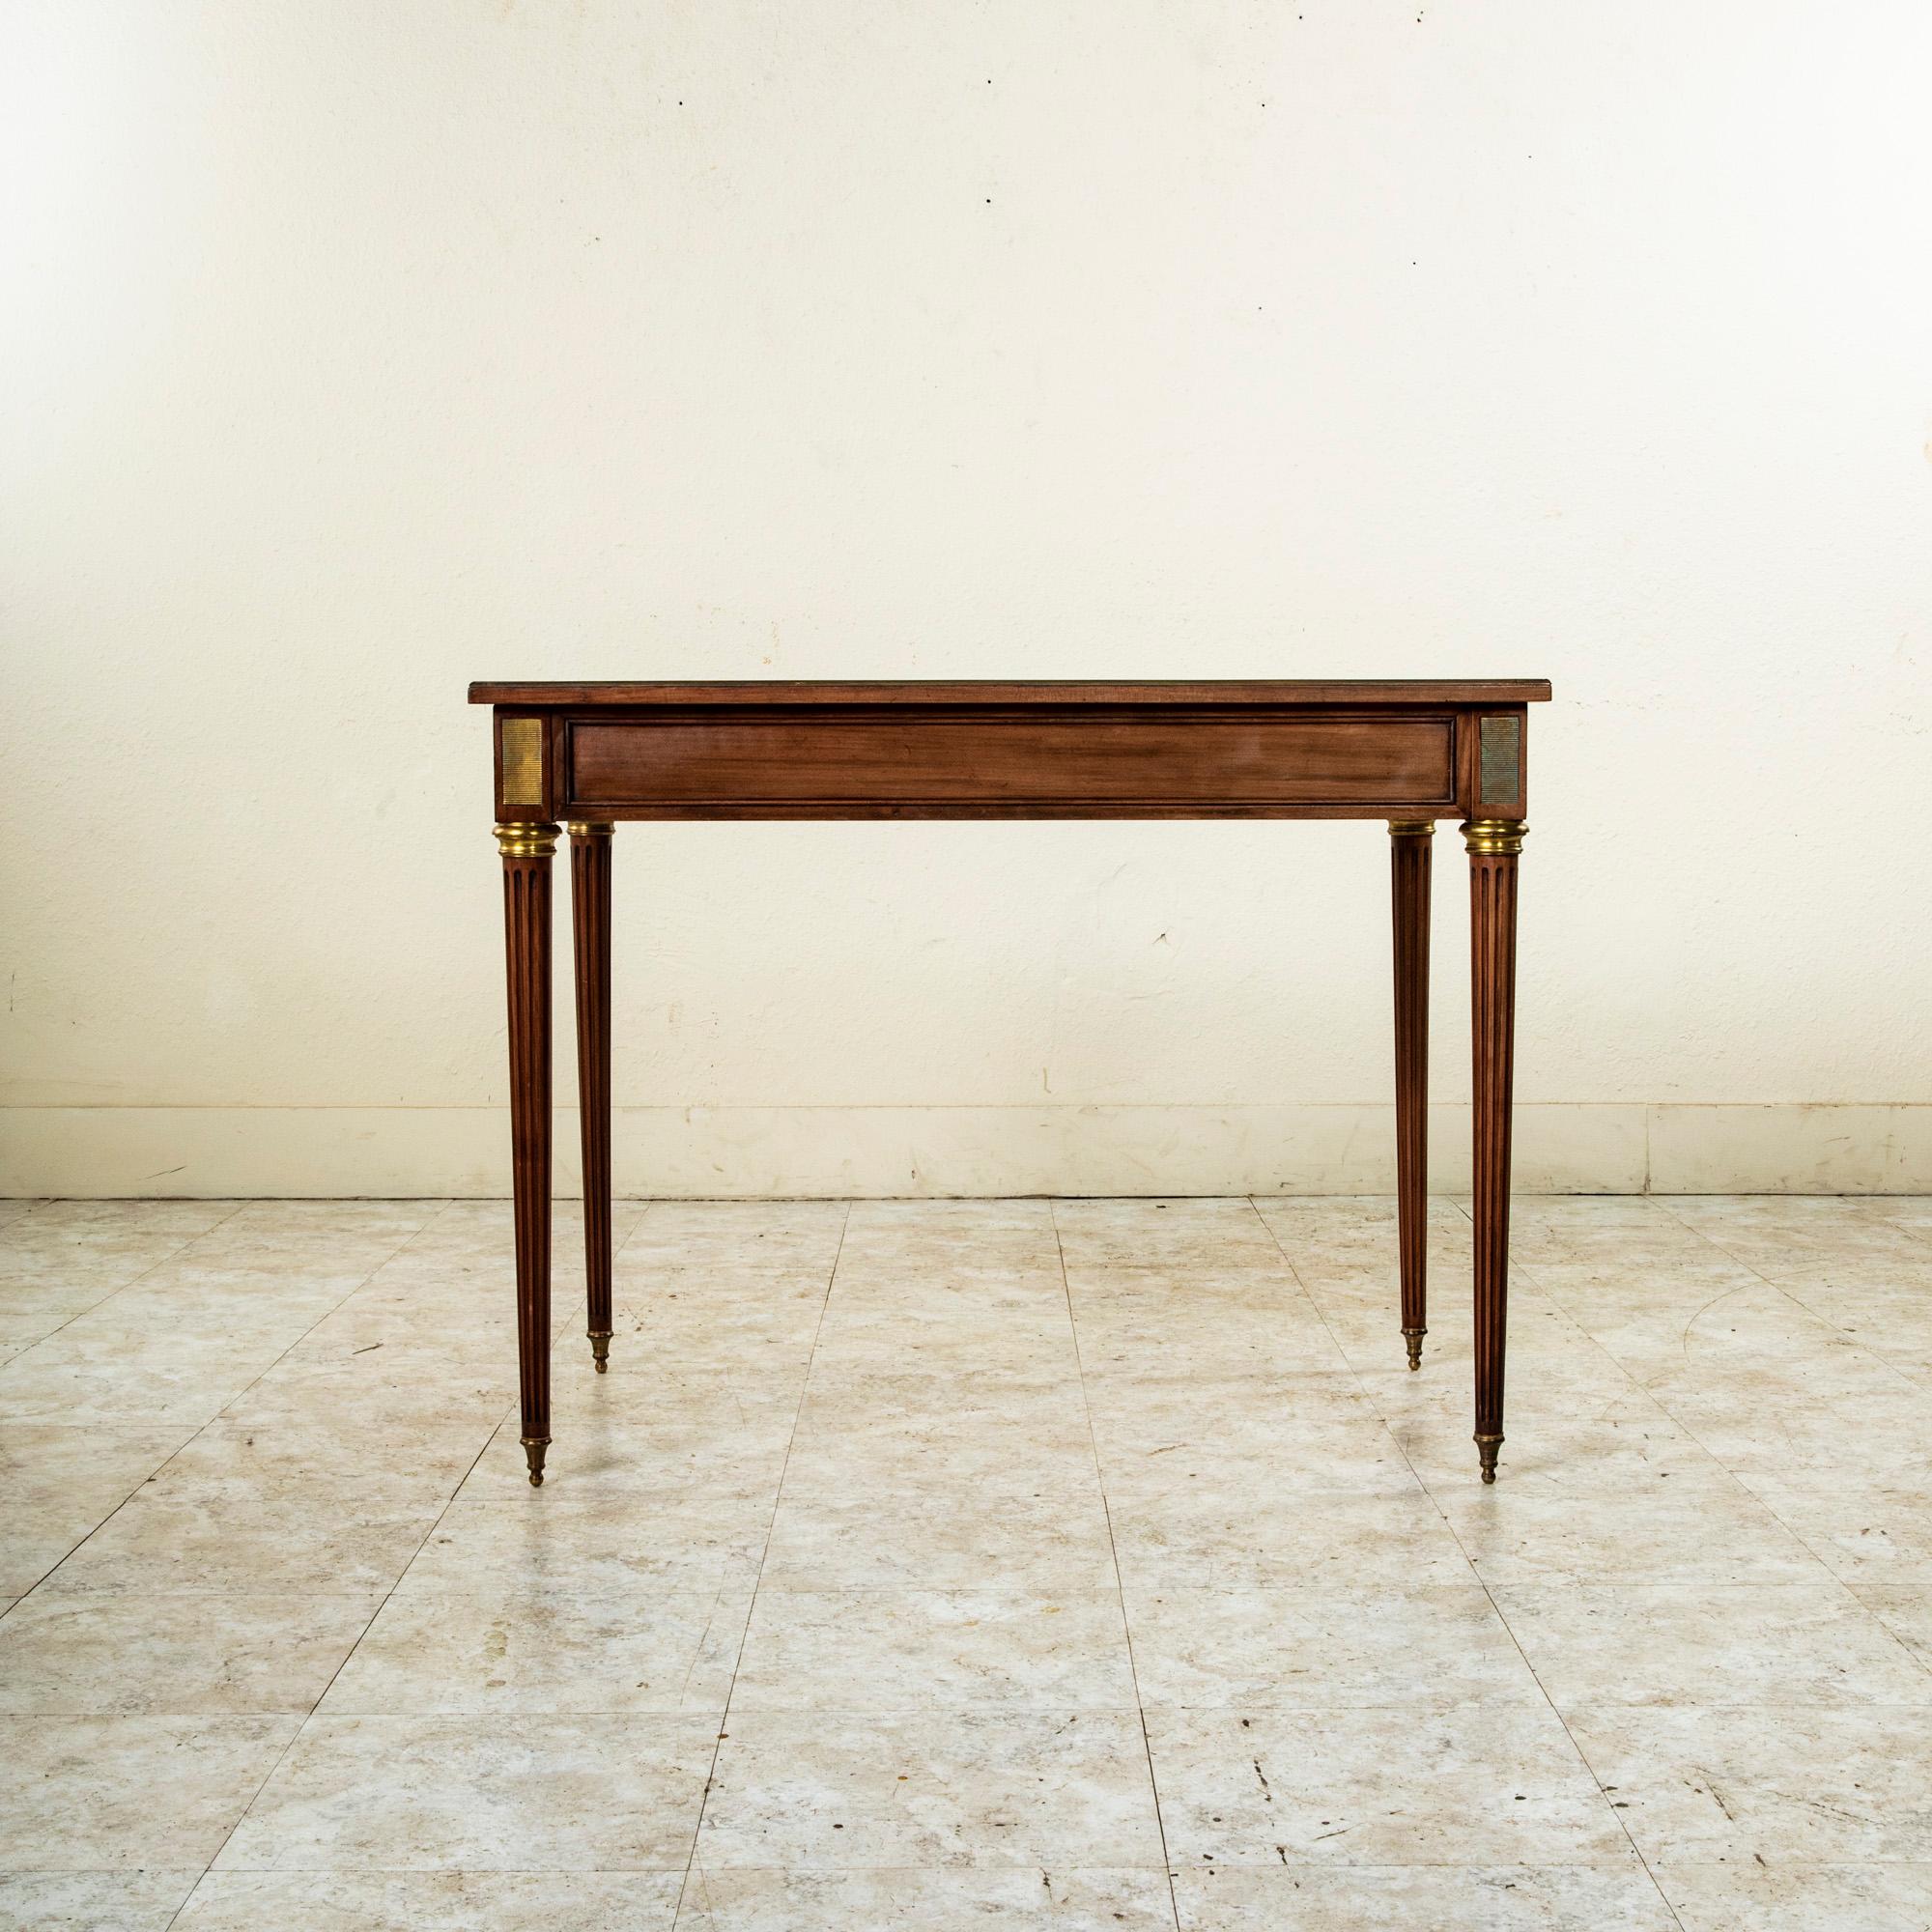 19th Century French Louis XVI Style Mahogany Desk, Writing Table, Leather Top For Sale 2